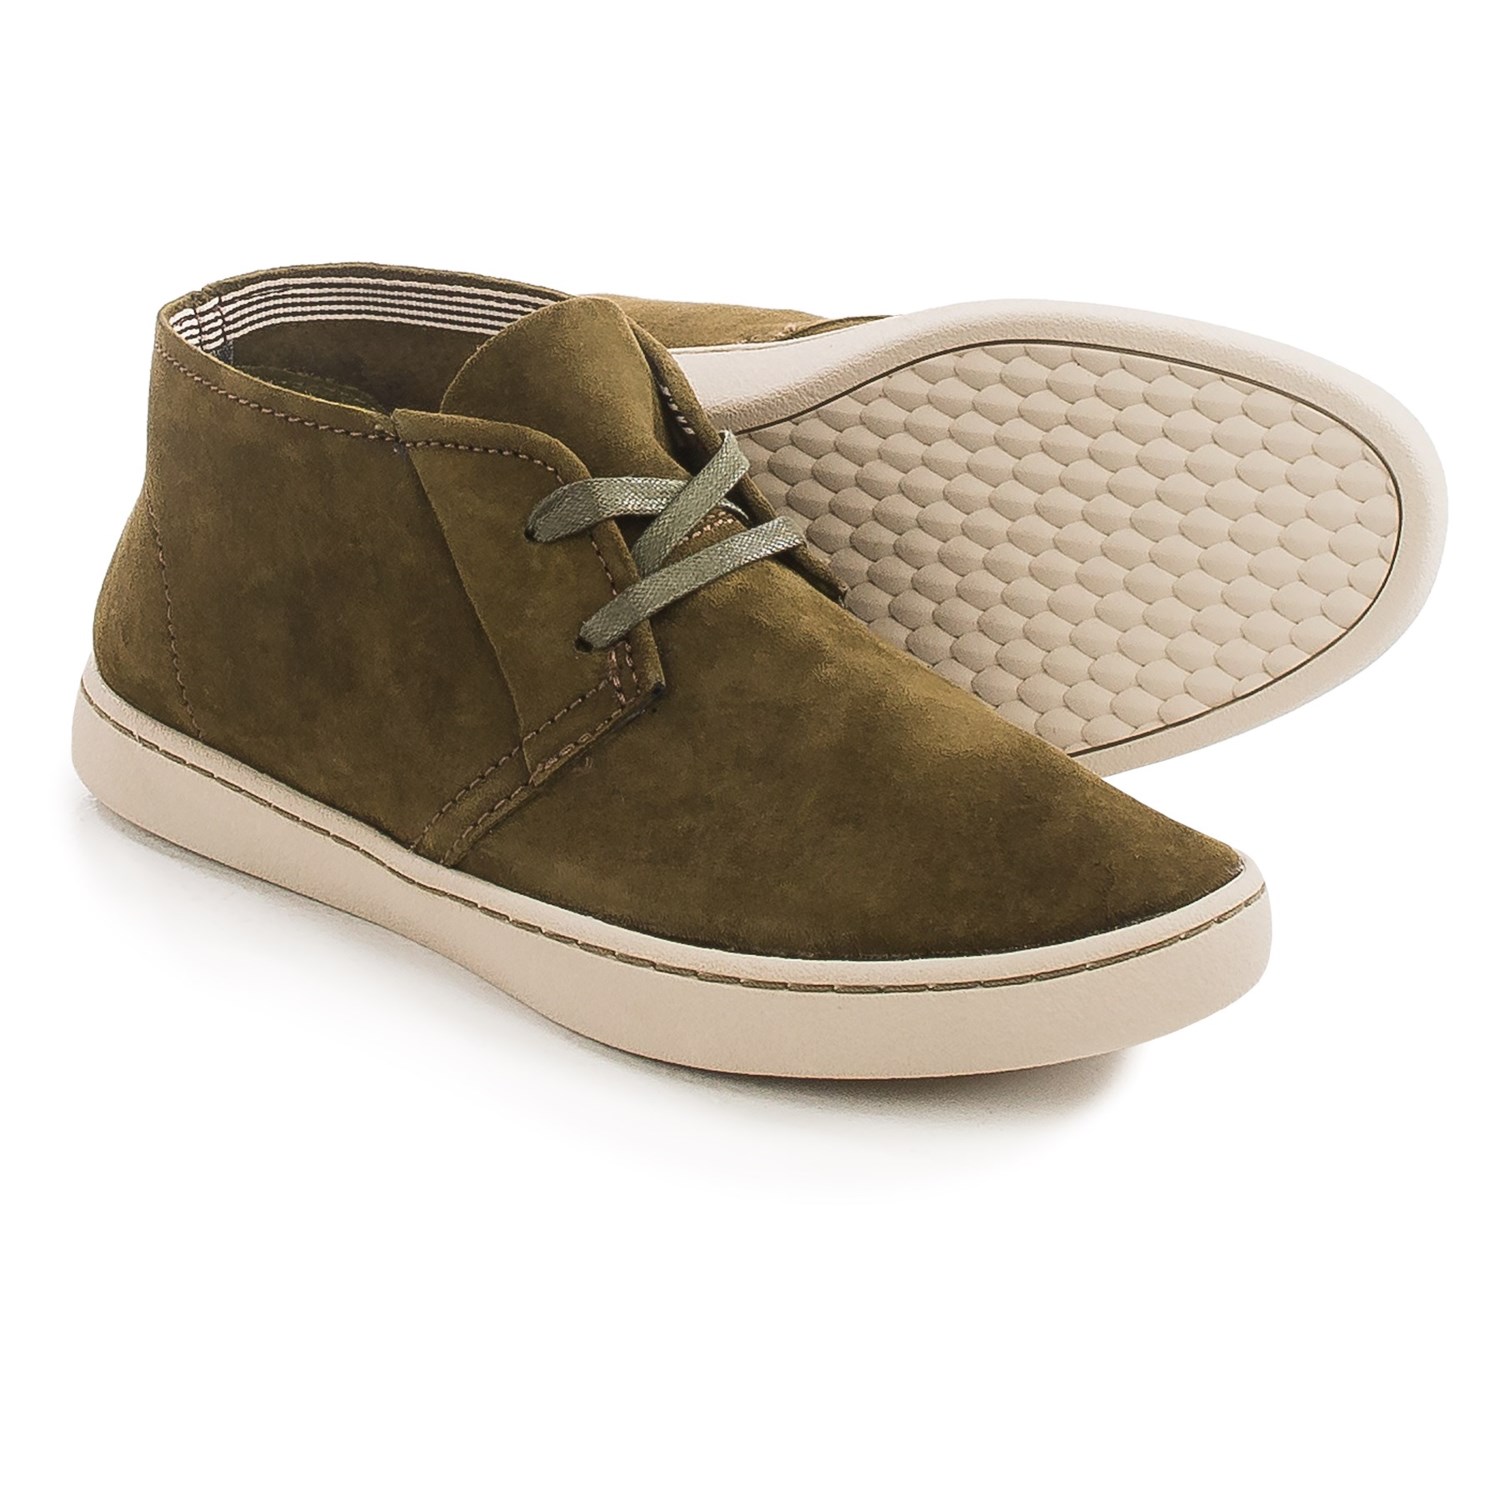 Hush Puppies Cille Gwen Chukka Boots (For Women) - Save 49%